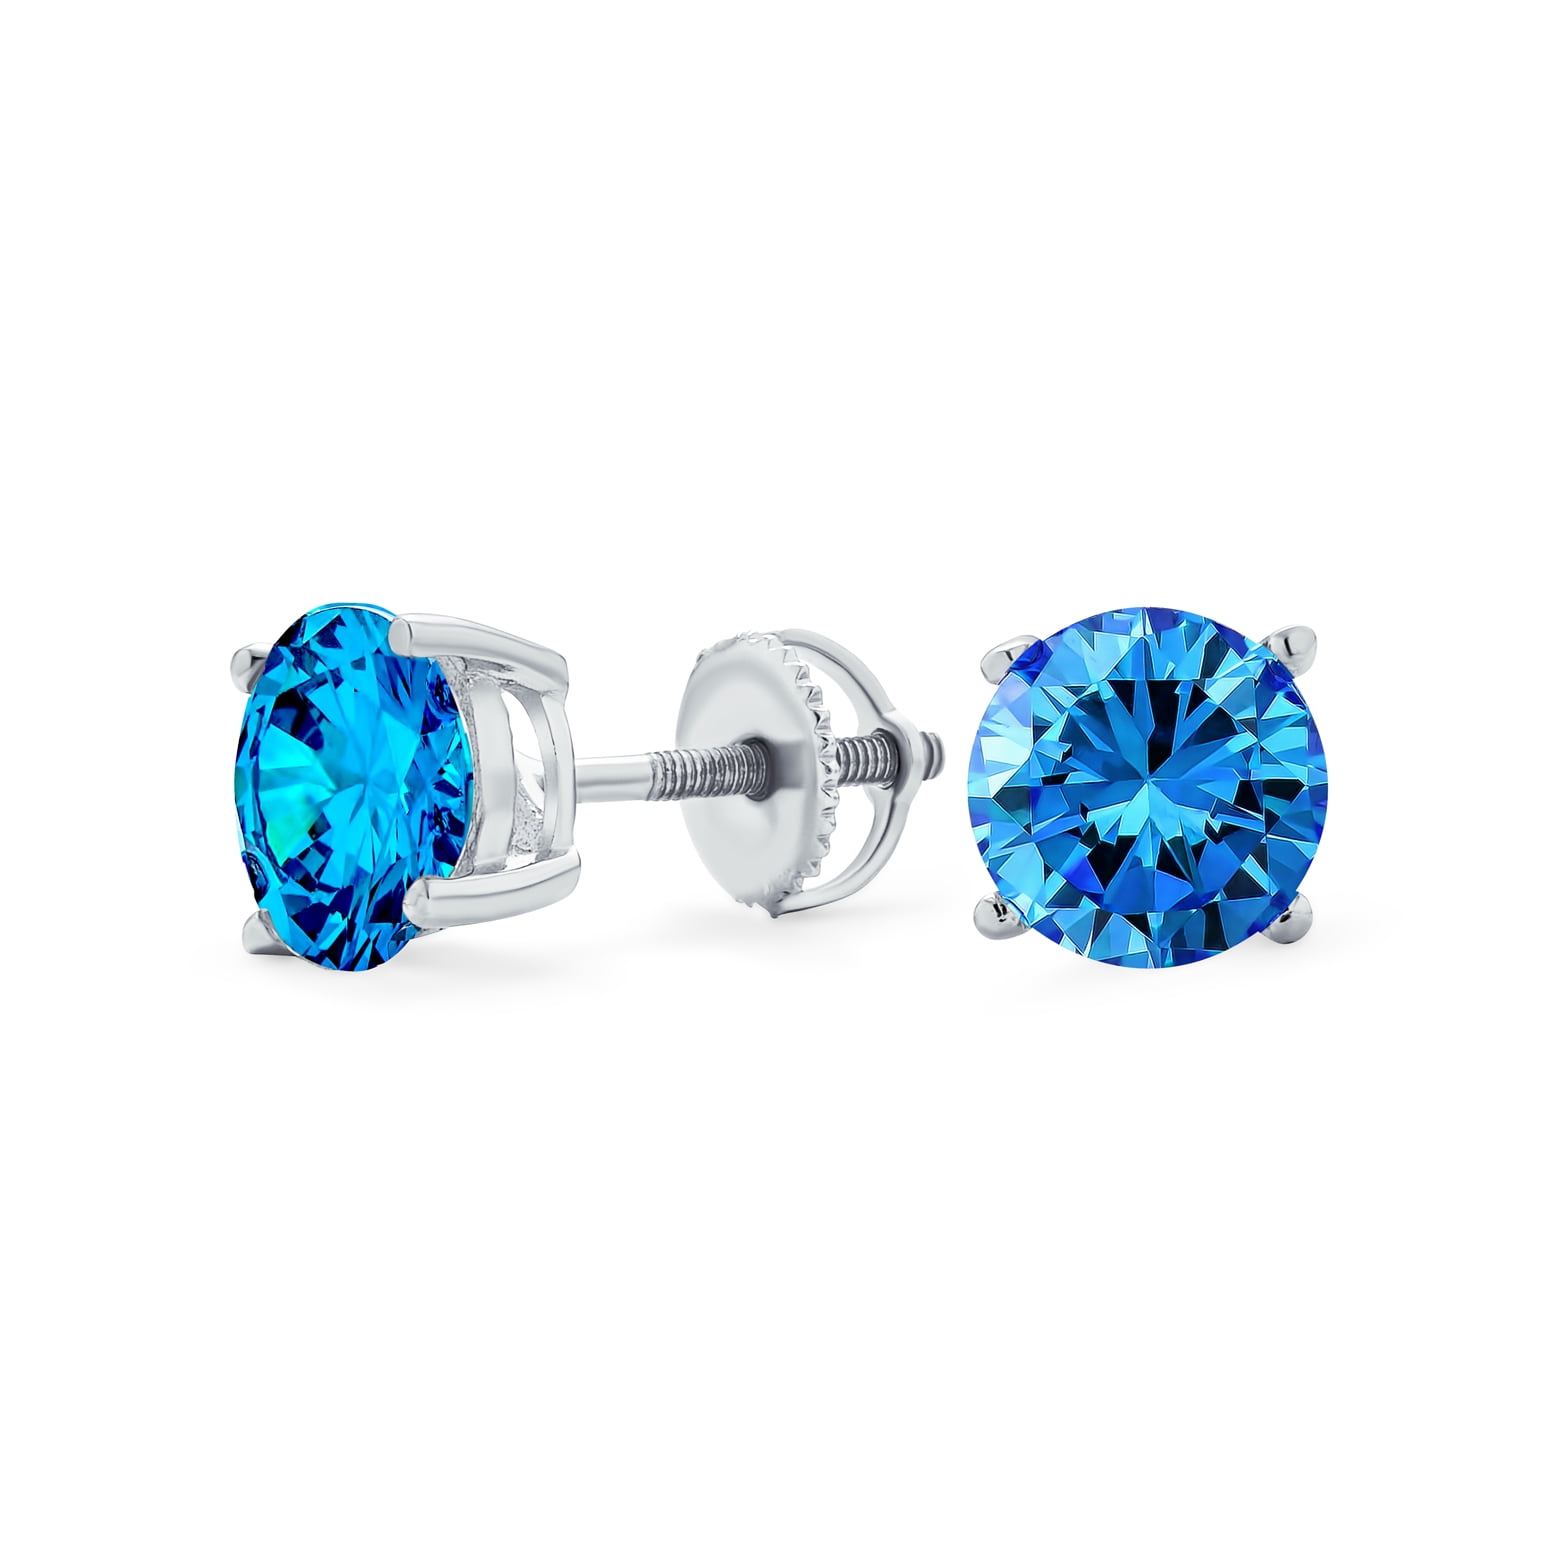 925 Sterling Silver Round-Cut Blue Cubic Zirconia Stud Earrings 3mm-8mm Options Simulated Diamond CZ Studs Hypoallergenic Jewelry 